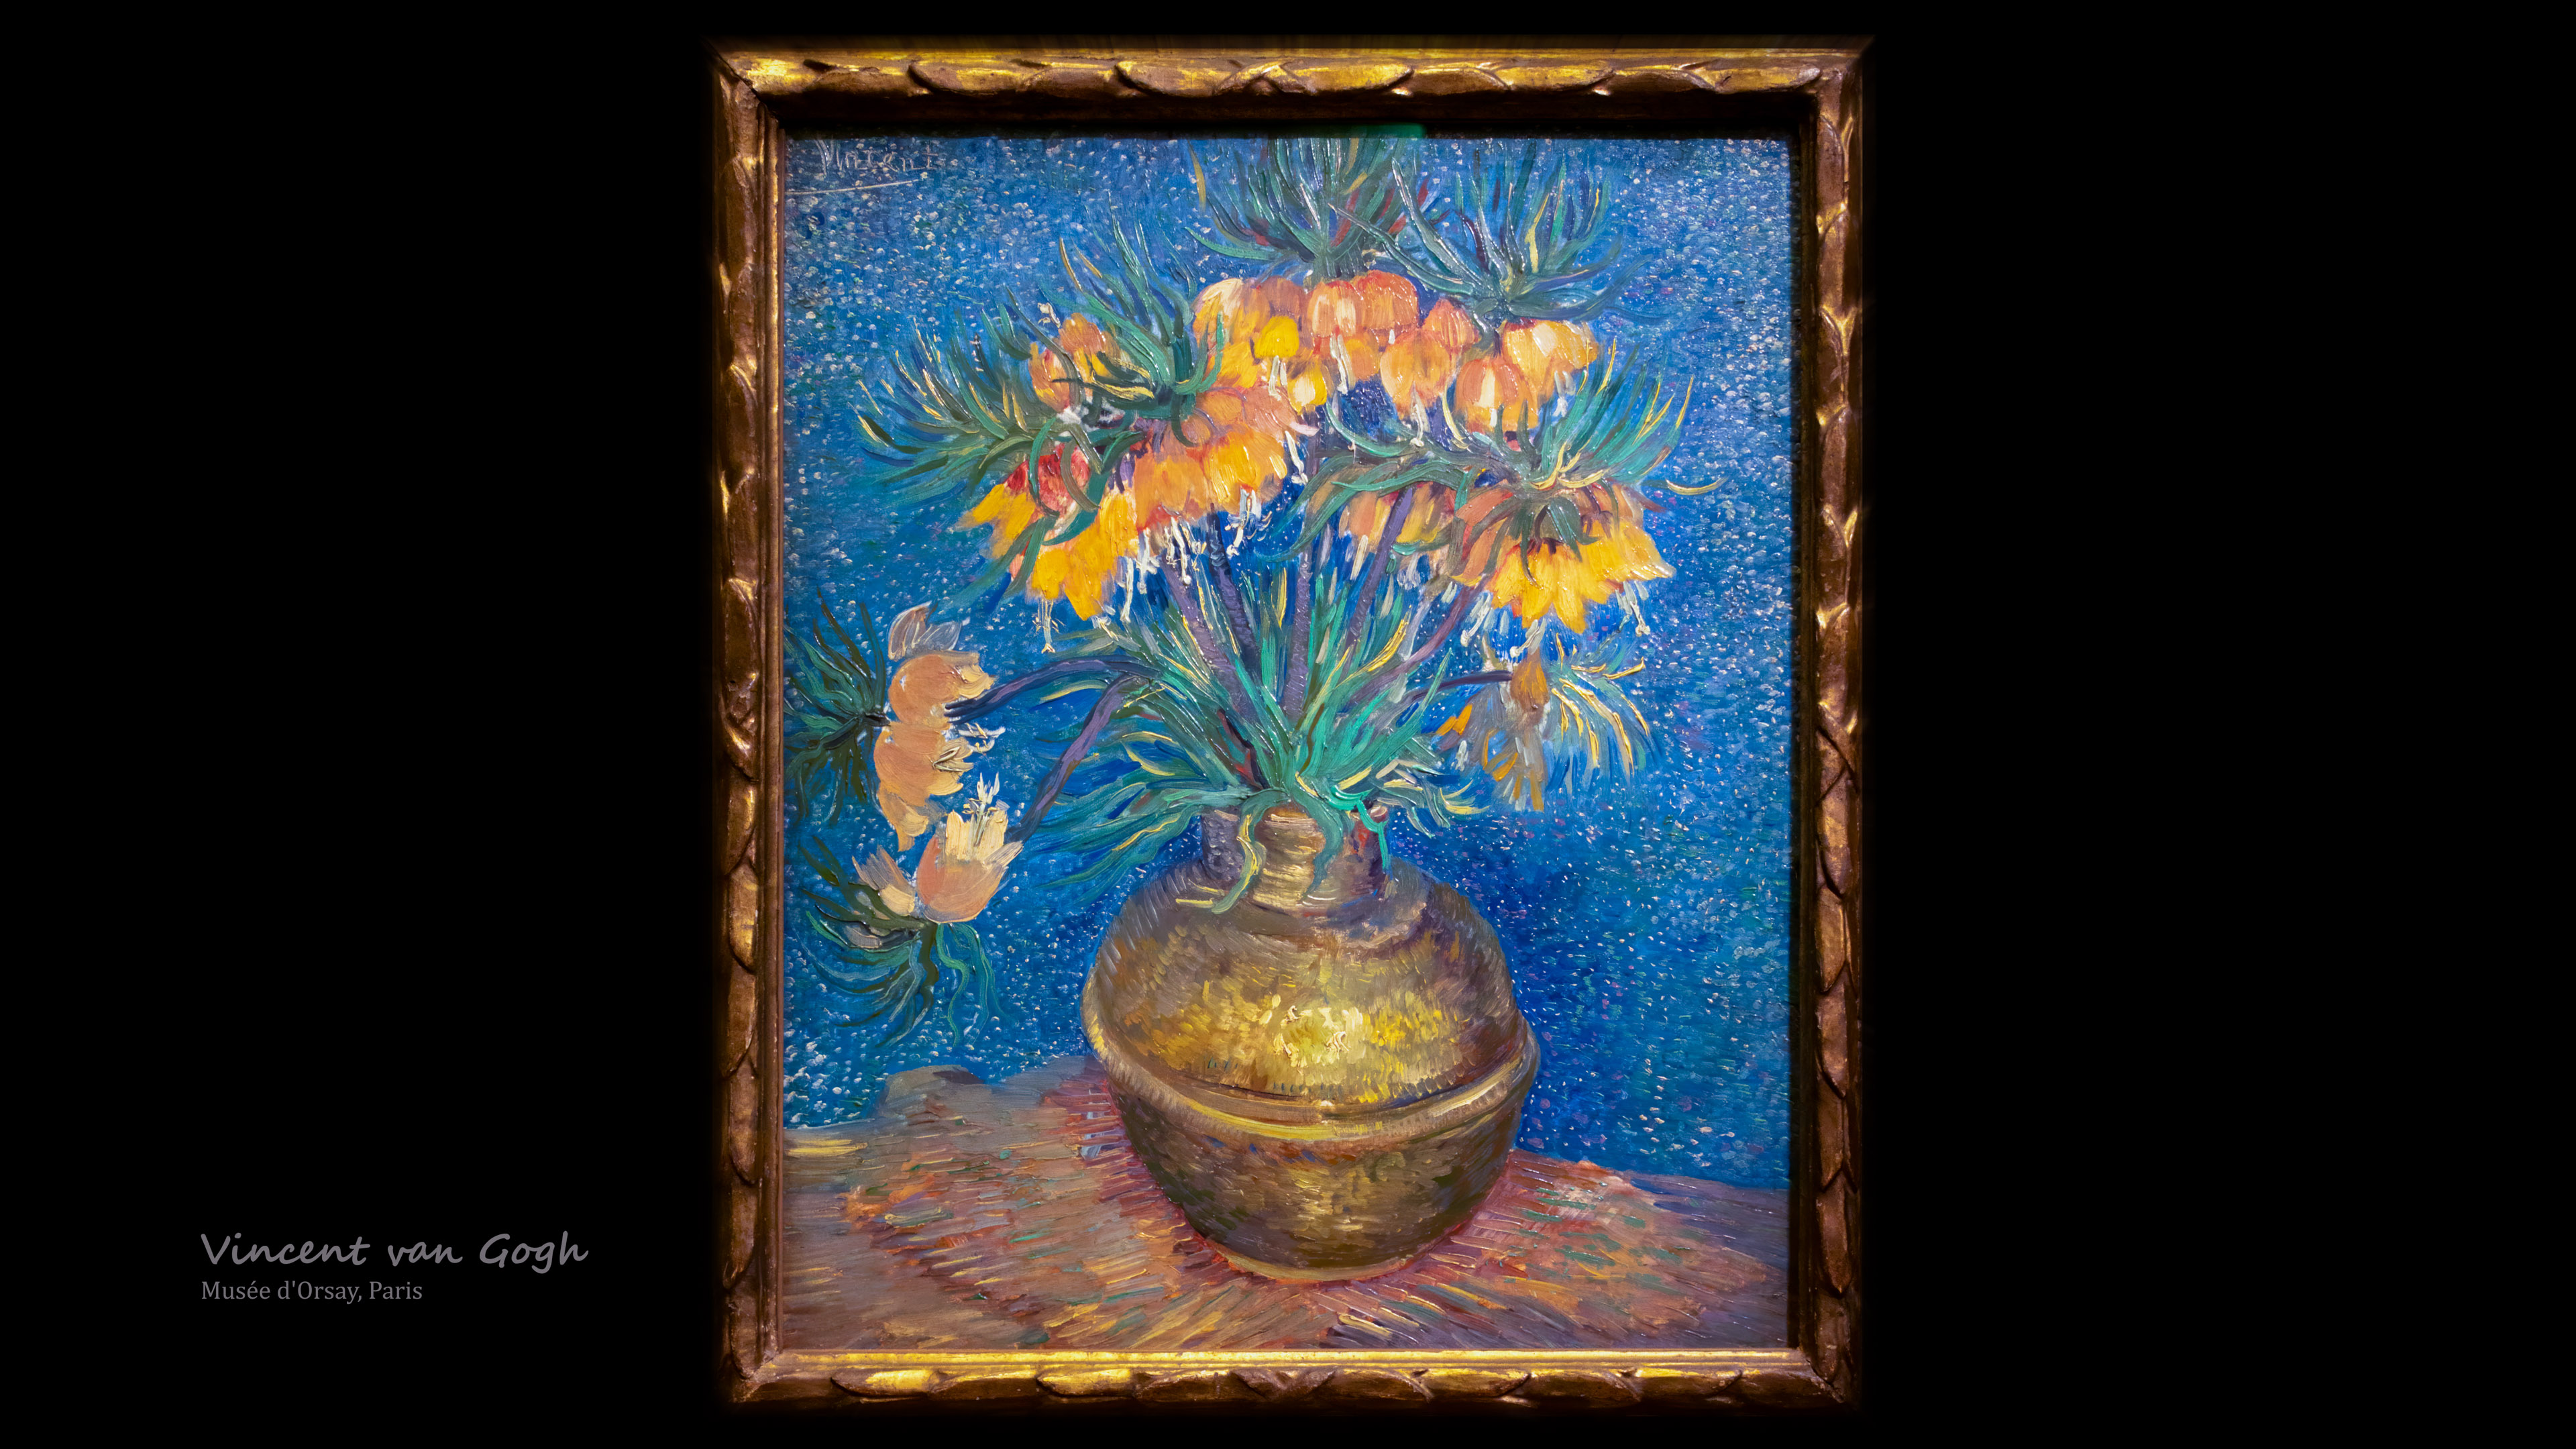 painting art wallpaper for pc by van Gogh in 4K Ultra HD resolution